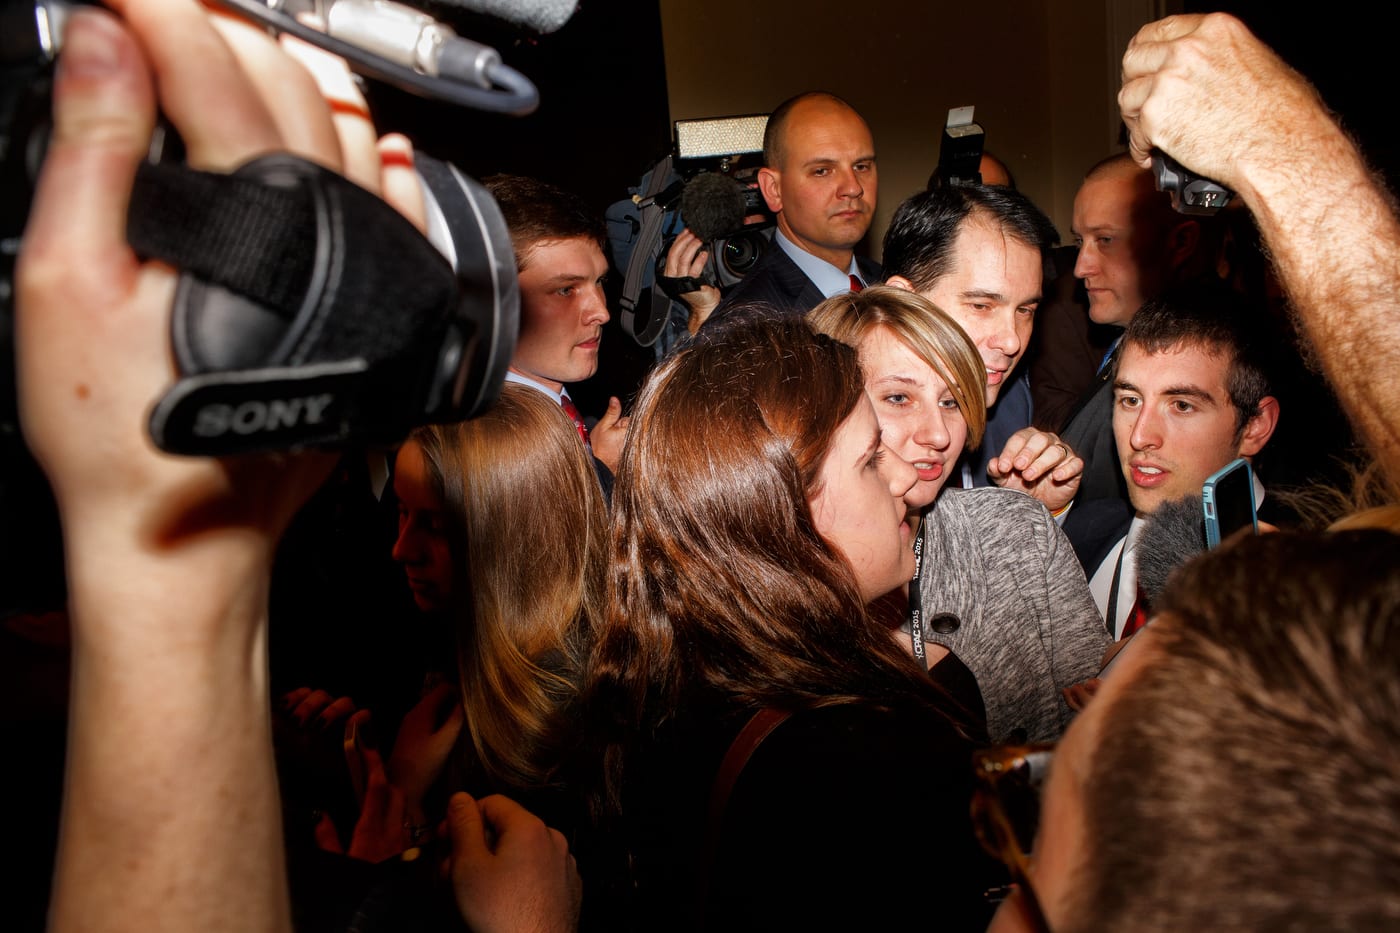 Wisconsin Governor Scott Walker is mobbed after speaking at CPAC in National Harbor, MD on Friday, February 27, 2015.